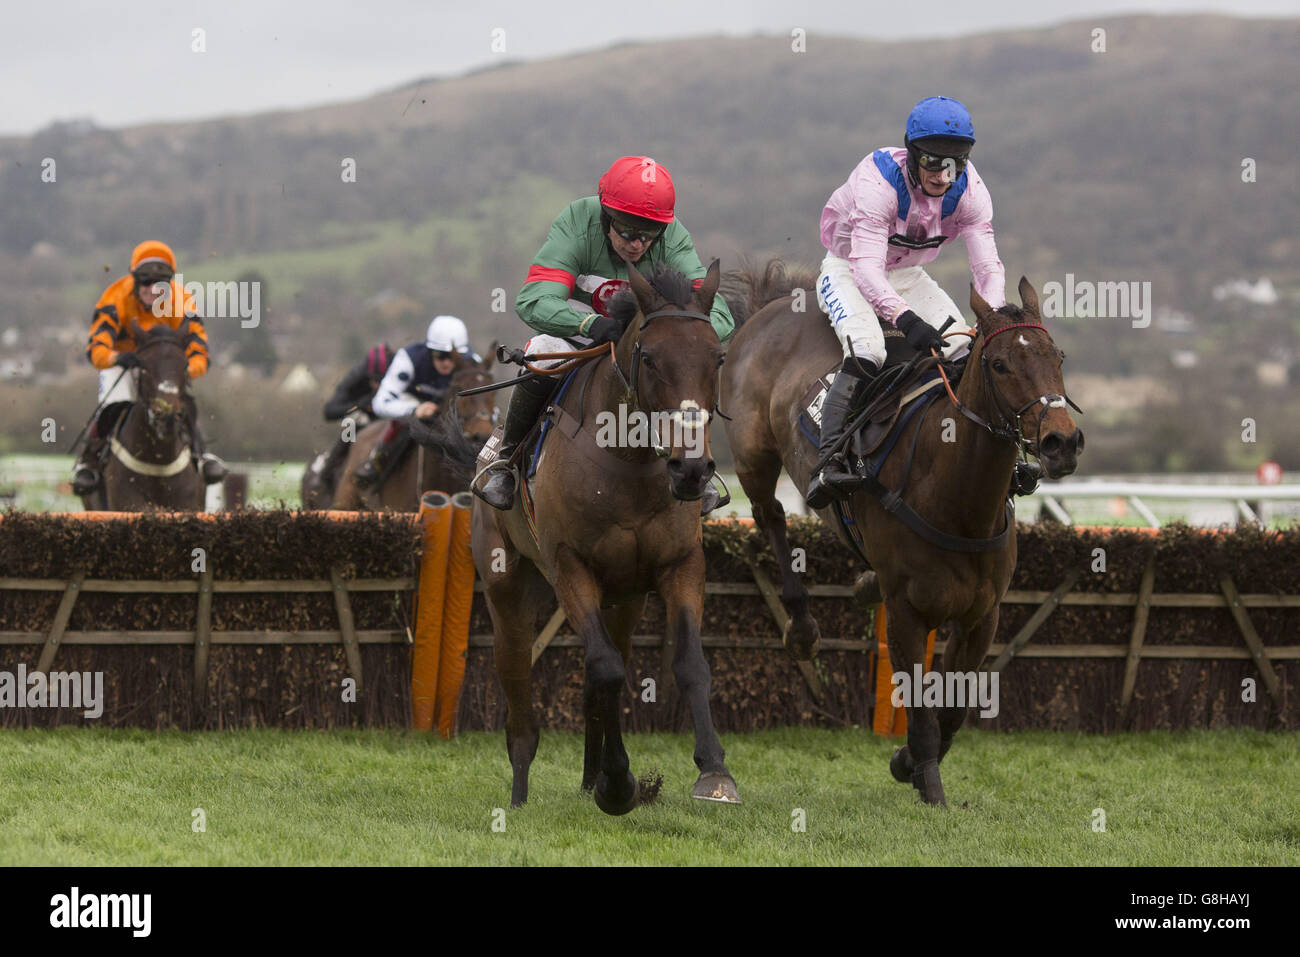 Unowhatimeanharry ridden by Noel Fehily (left) gets the better of Final Nudge ridden by Daryl Jacob before going on to win The Albert Bartlett Novices' Hurdle Race run during day two of The International at Cheltenham Racecourse. Stock Photo